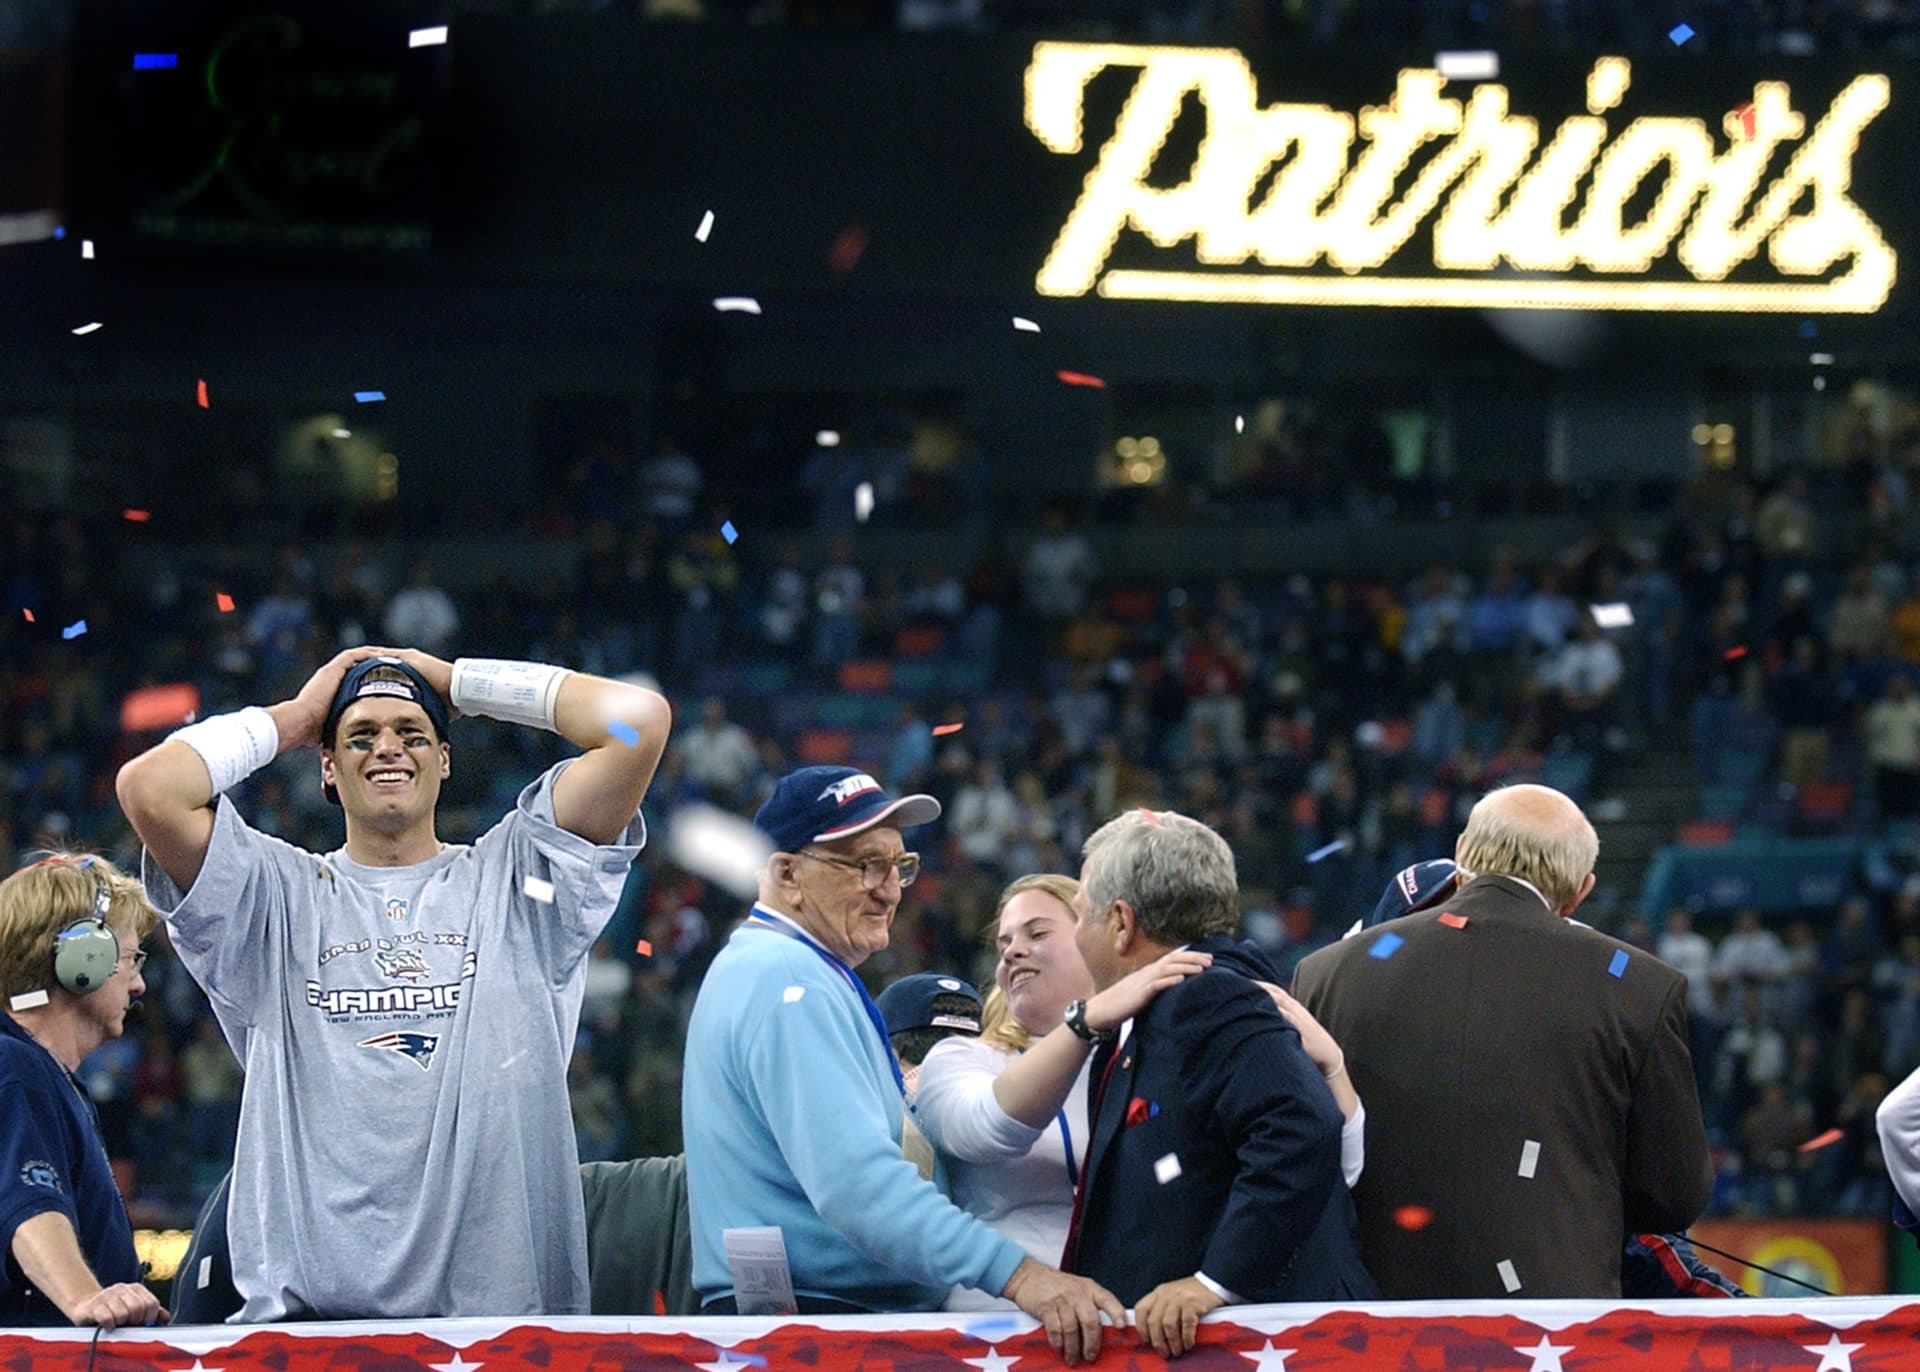 New England Patriots quarterback and Super Bowl MVP Tom Brady reacts on the podium following New England's upset victory over the St. Louis Rams in Super Bowl XXXVI at the Louisiana Superdome in New Orleans on Feb. 3, 2002. (Jim Davis/The Boston Globe via Getty Images)